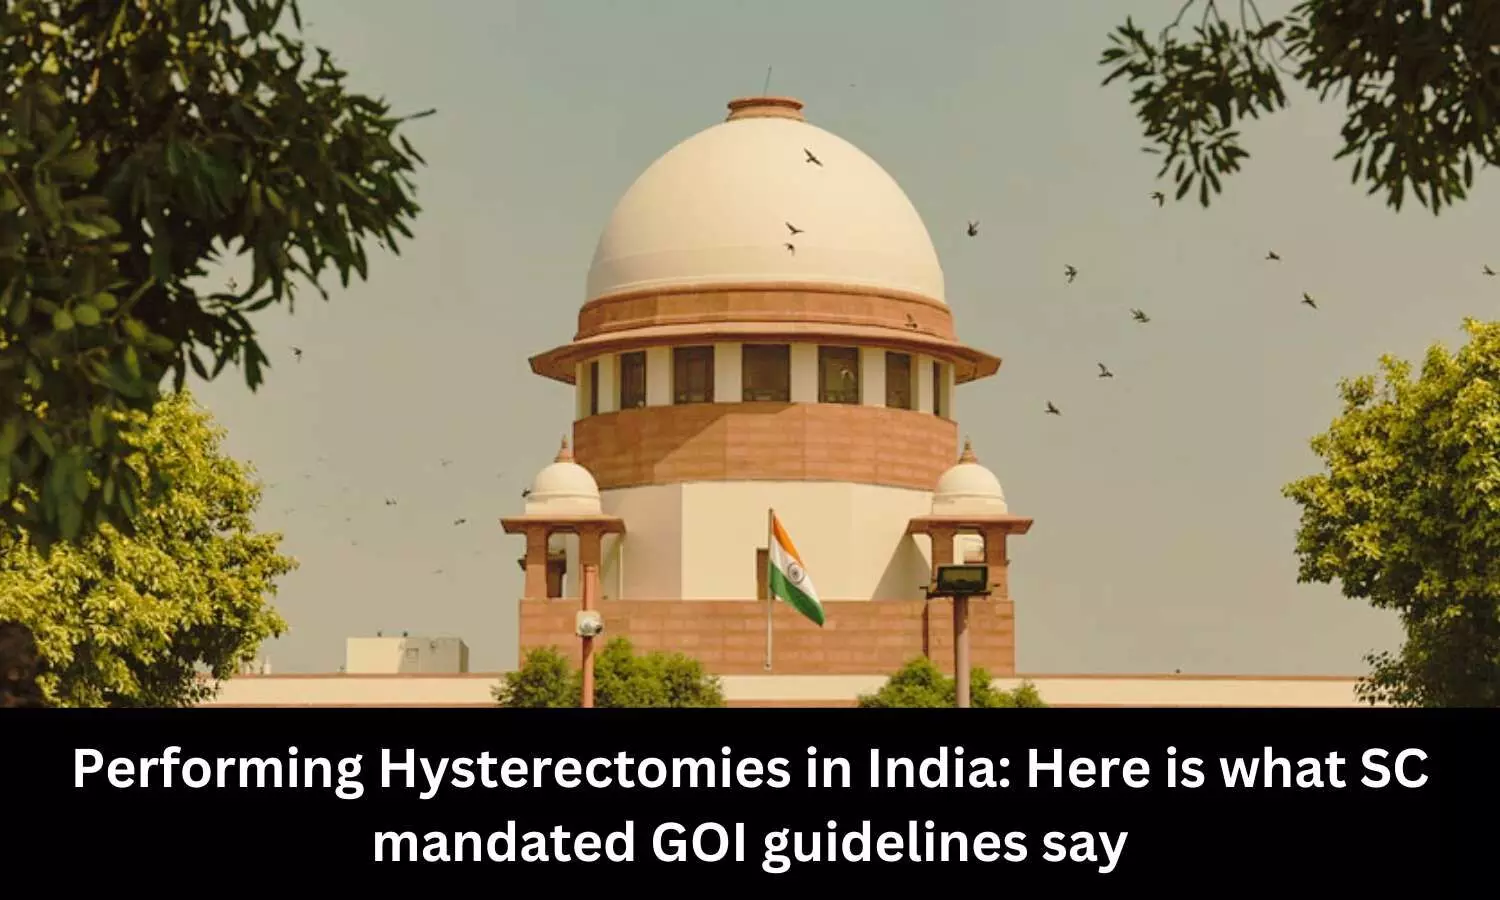 Performing Hysterectomies in India: Here is what SC mandated GOI guidelines say